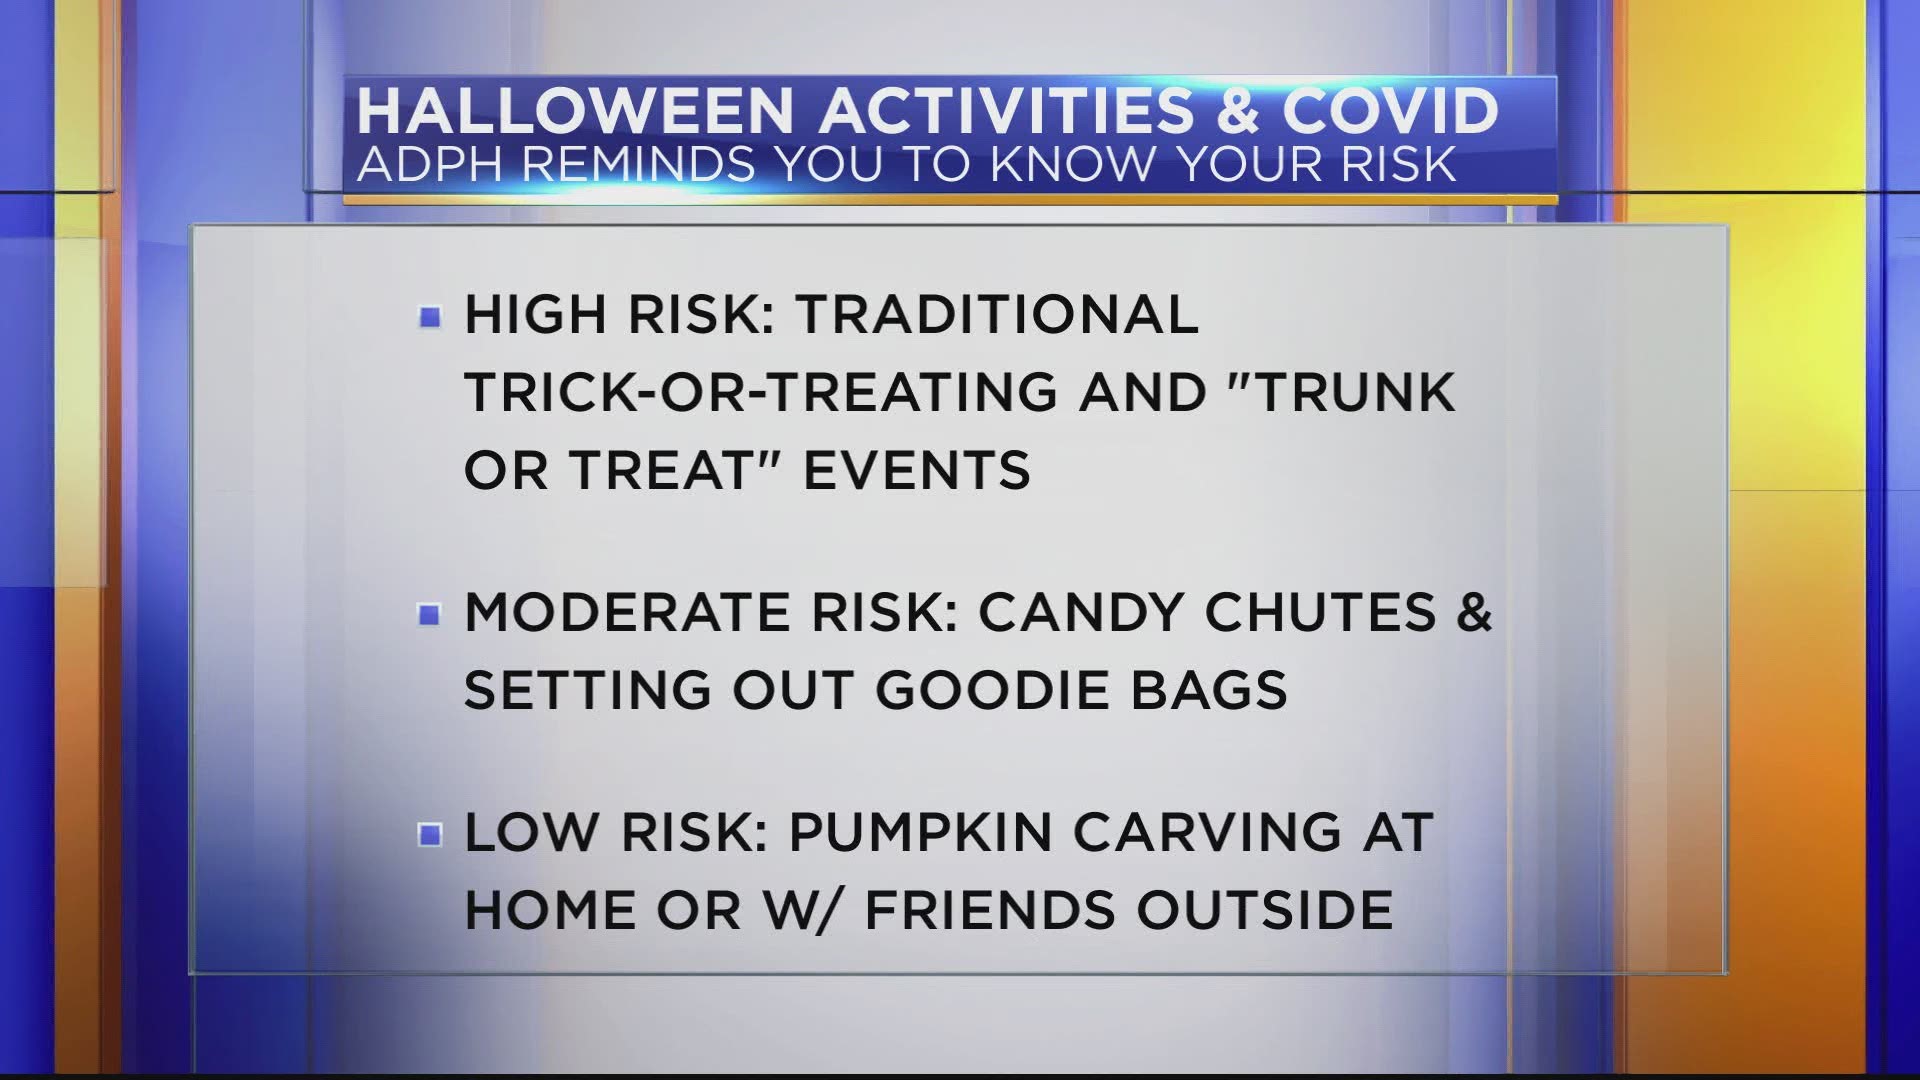 The Alabama Department of Public Health has released some advice on how to stay safe and healthy this Halloween.